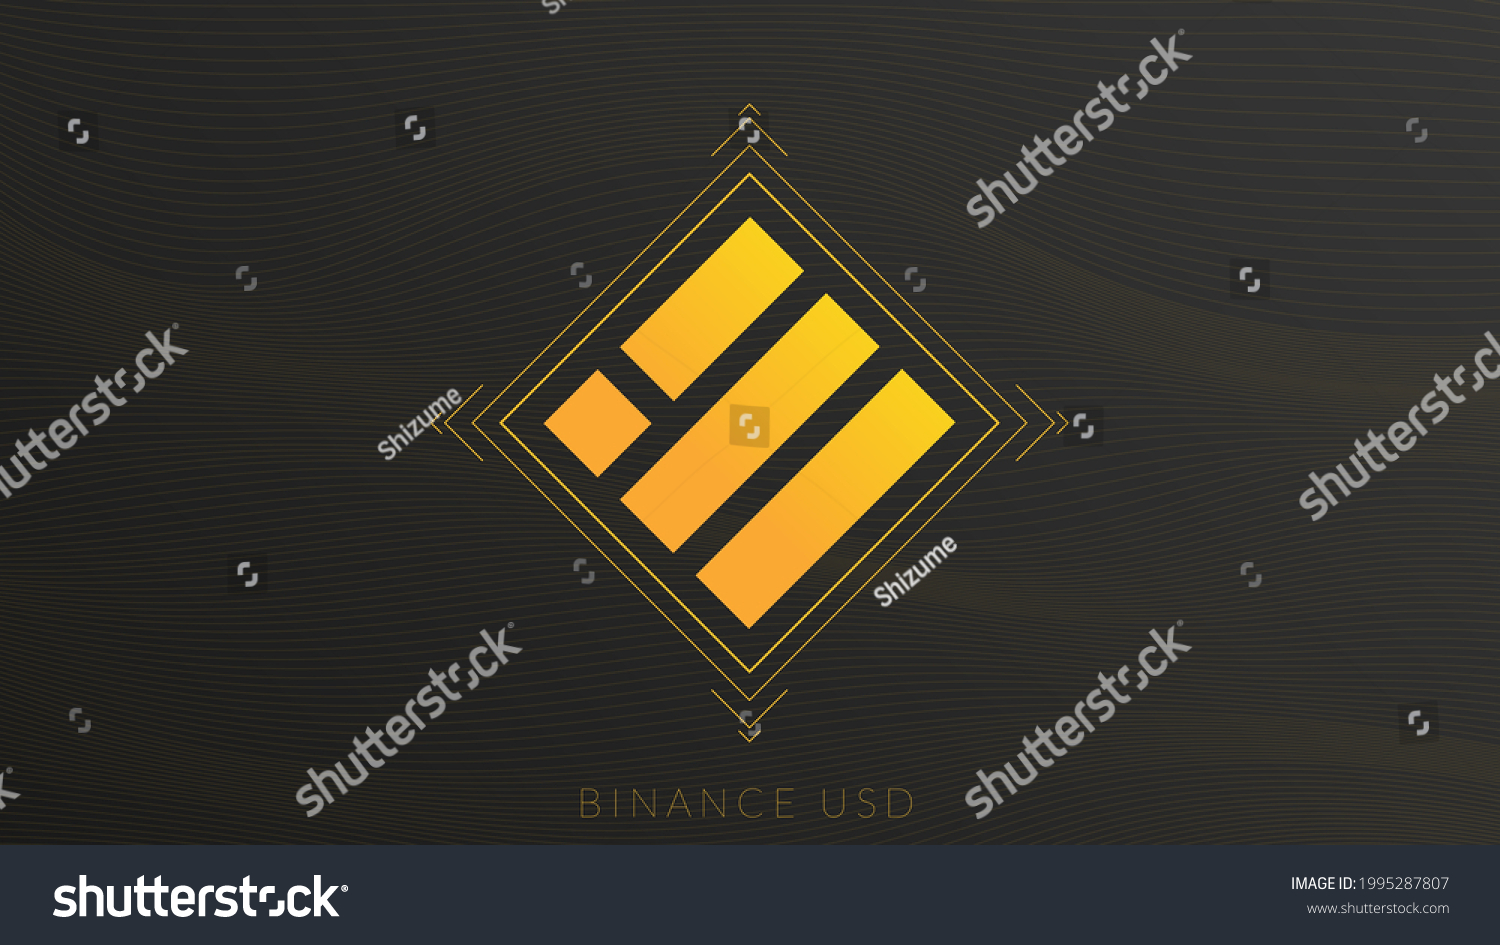 SVG of BUSD cryptocurrency logo on dark background with wavy thin lines. svg